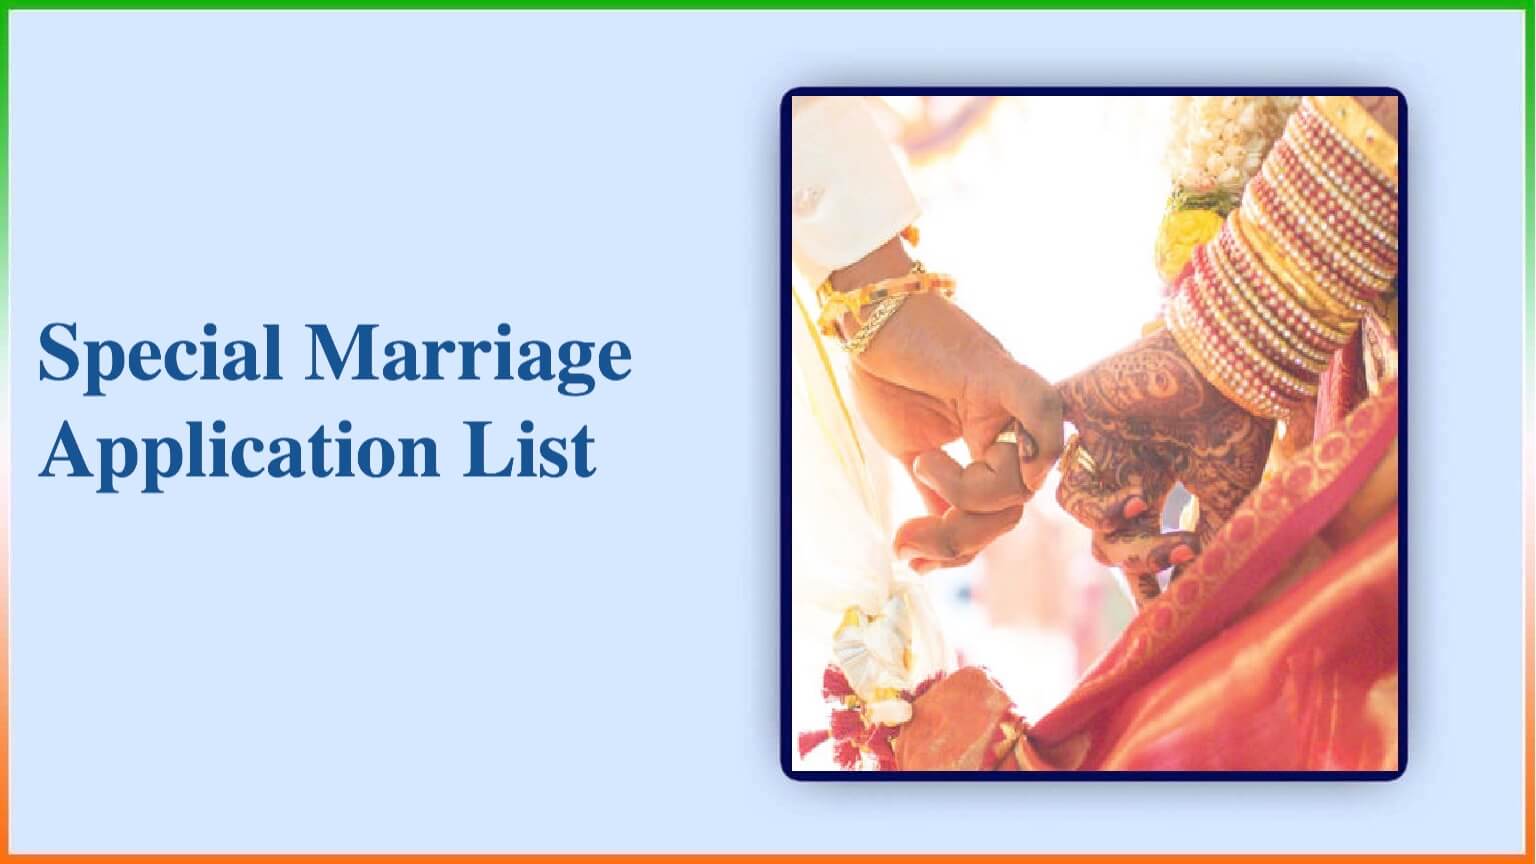 Special Marriage Application List